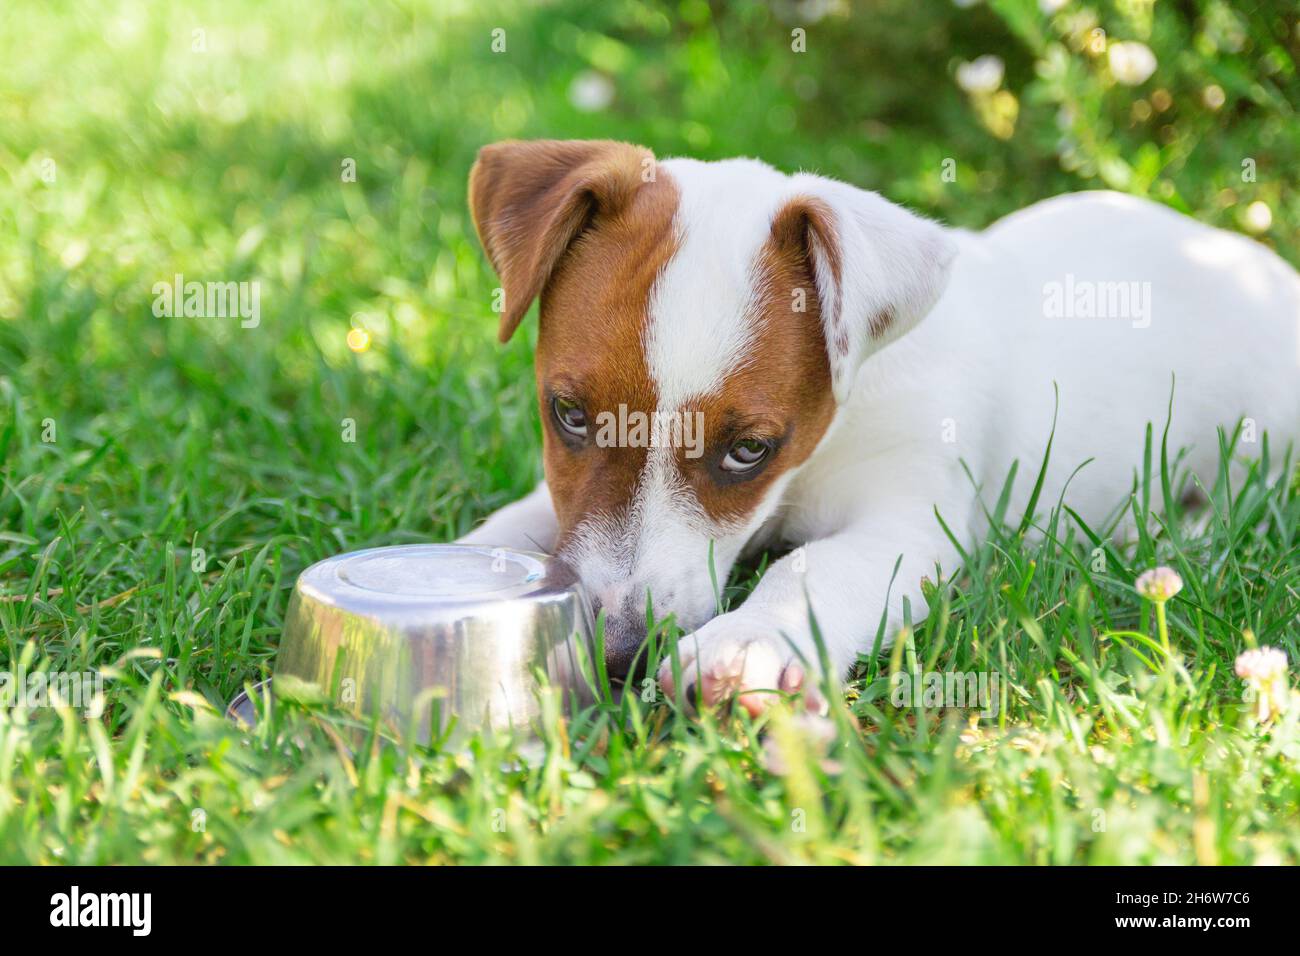 Domestic life with dog. Hungry dog with sad eyes is waiting for feeding. Hungry or thirsty dog fetches metal bowl to get feed or water. Stock Photo